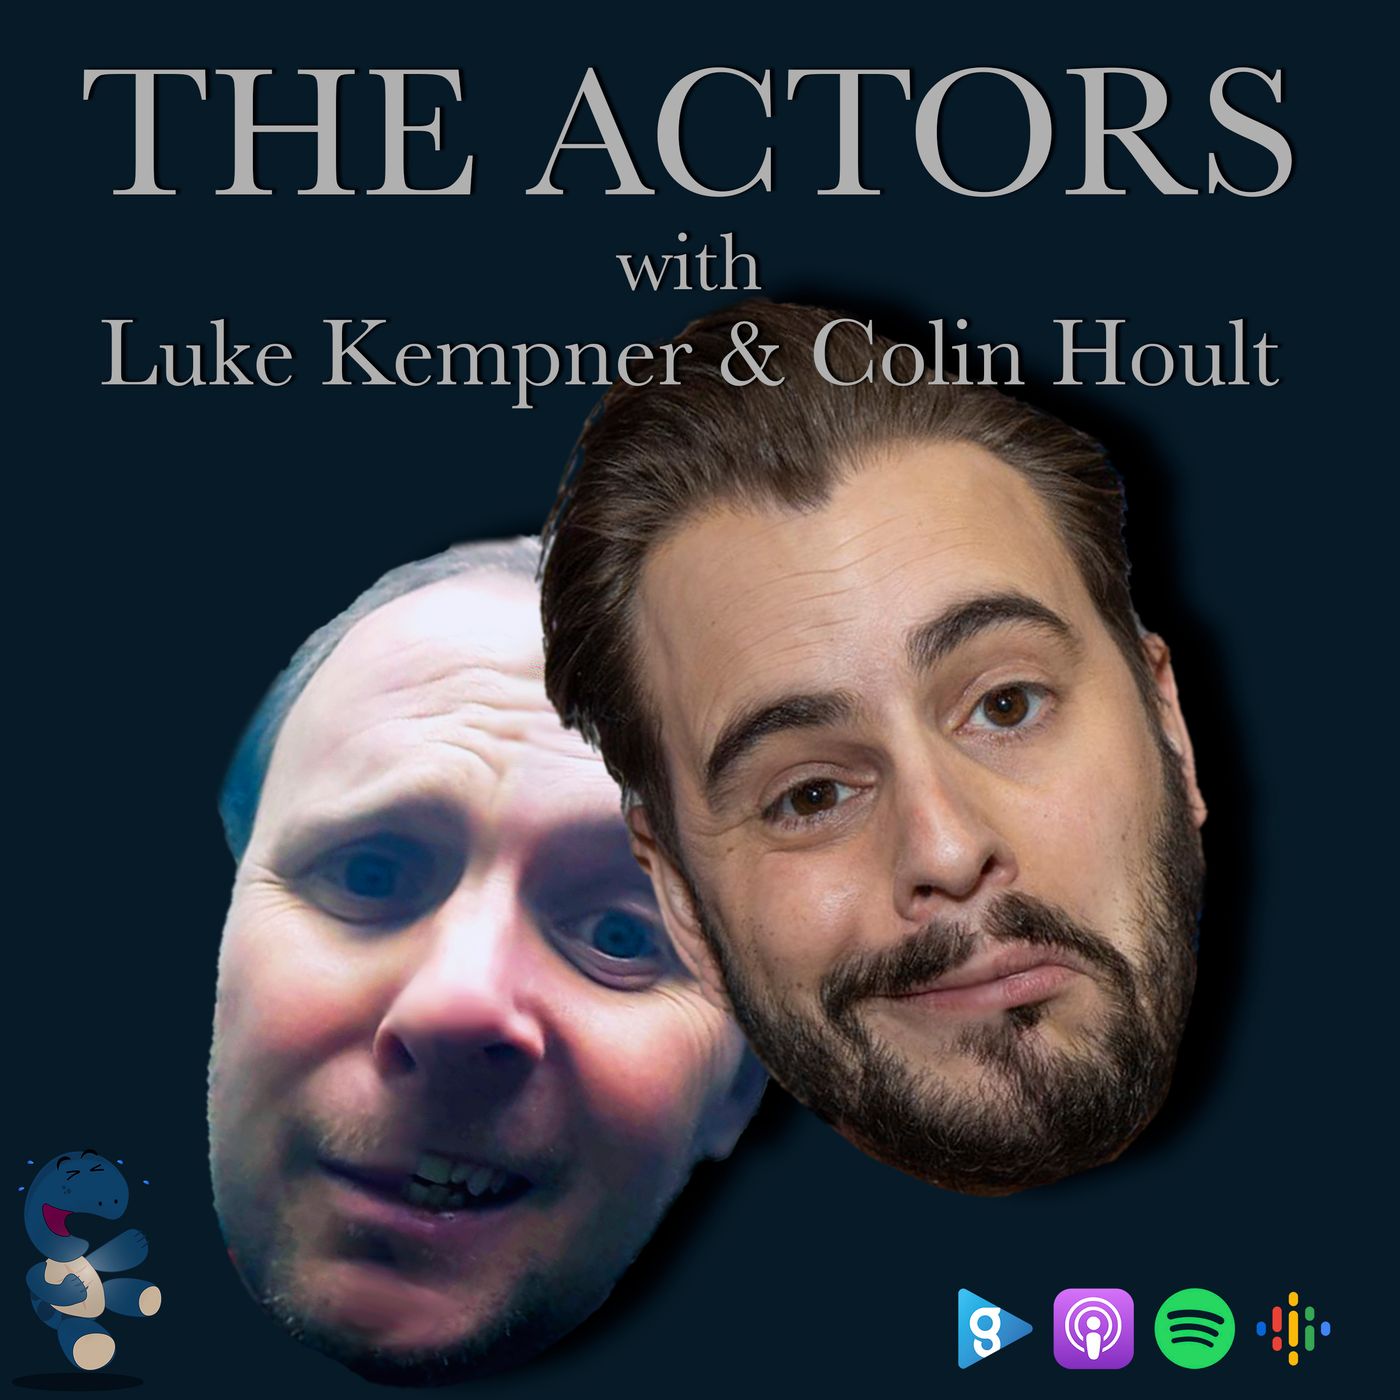 The Actors with Luke Kempner & Colin Hoult TRAILER